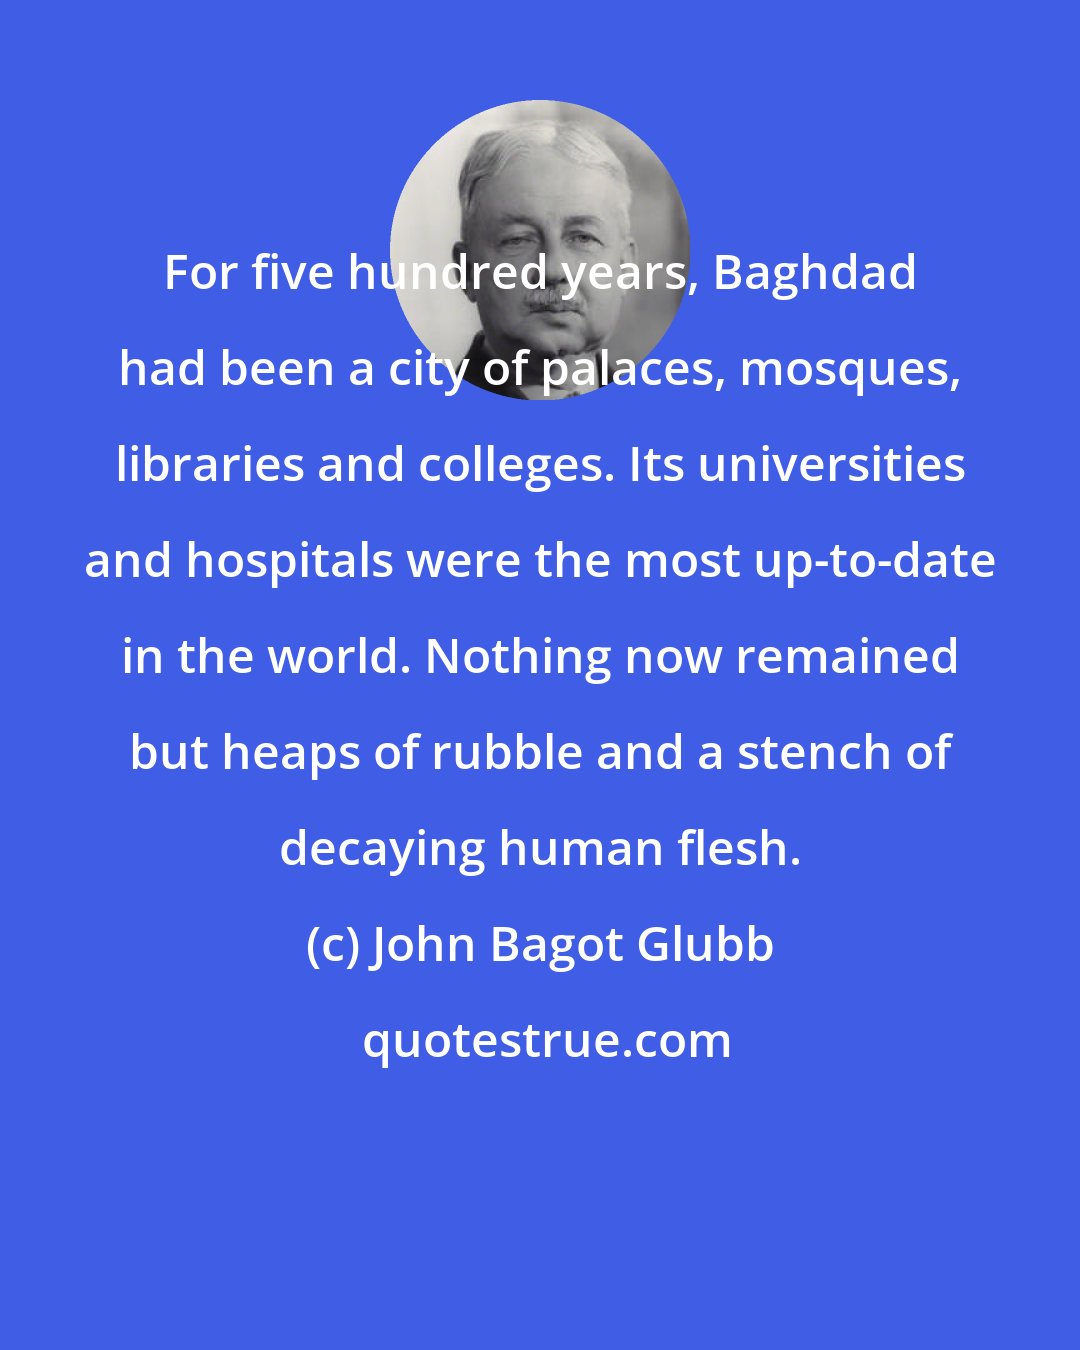 John Bagot Glubb: For five hundred years, Baghdad had been a city of palaces, mosques, libraries and colleges. Its universities and hospitals were the most up-to-date in the world. Nothing now remained but heaps of rubble and a stench of decaying human flesh.